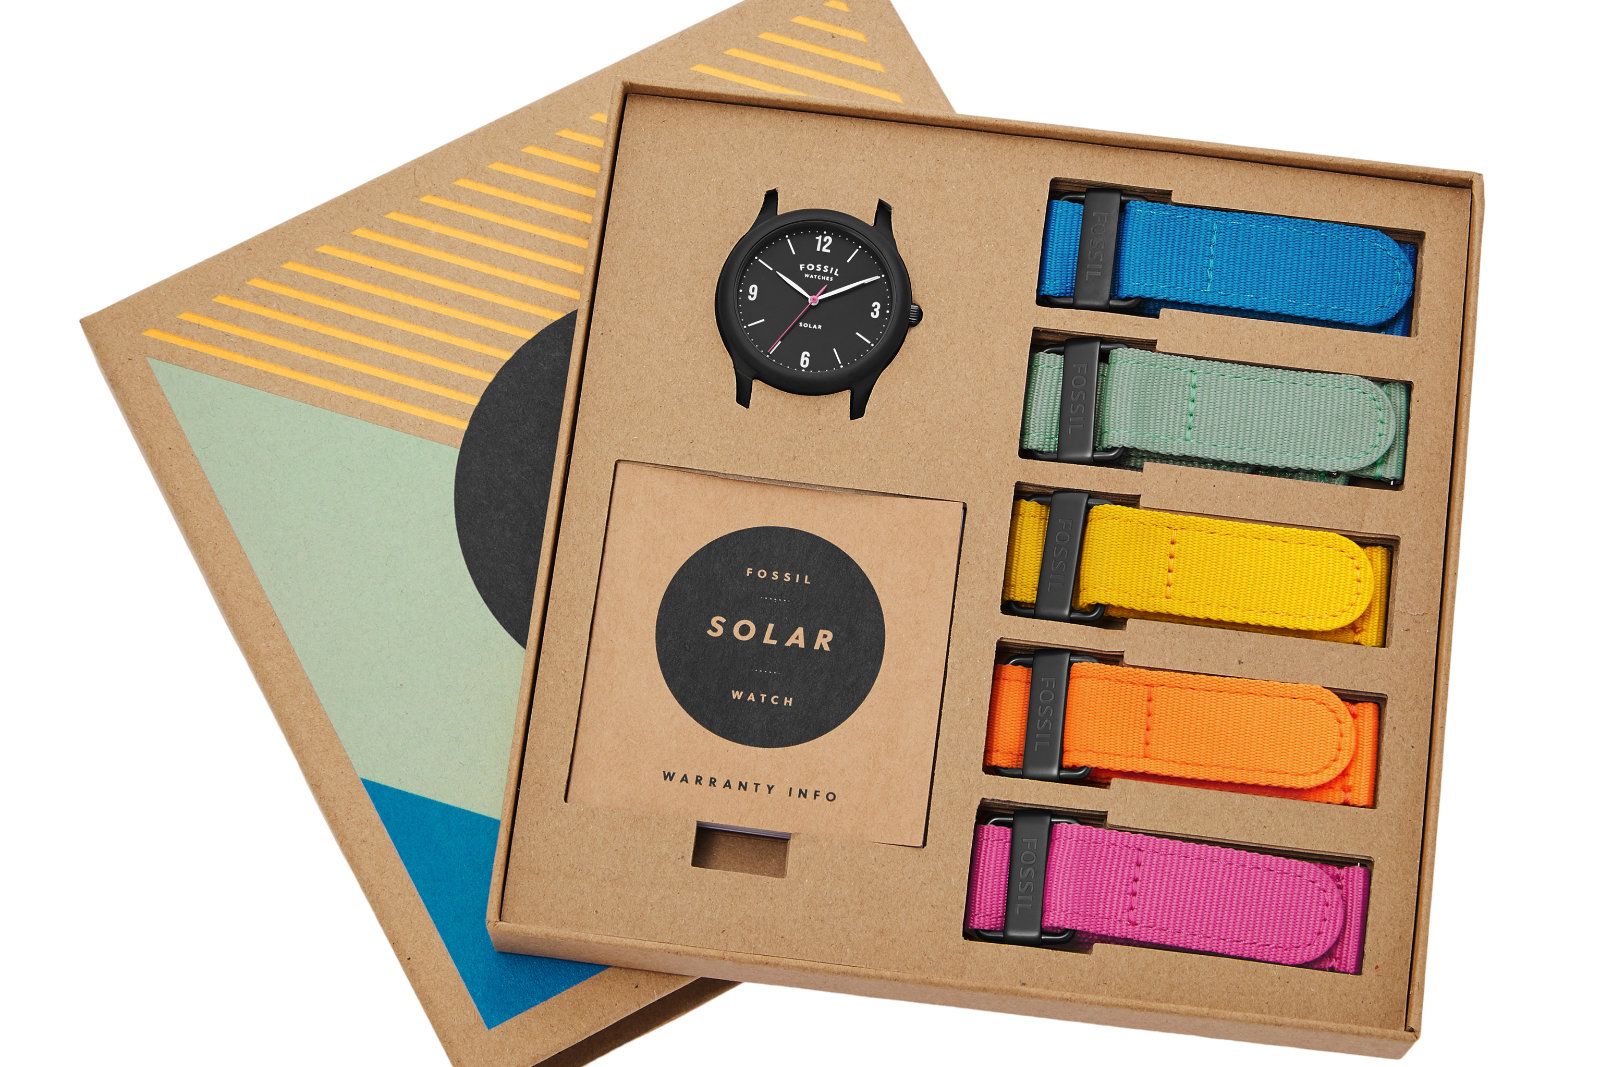 Fossil Solar watch launched features solar powered charging and bio-plastic casing image 2